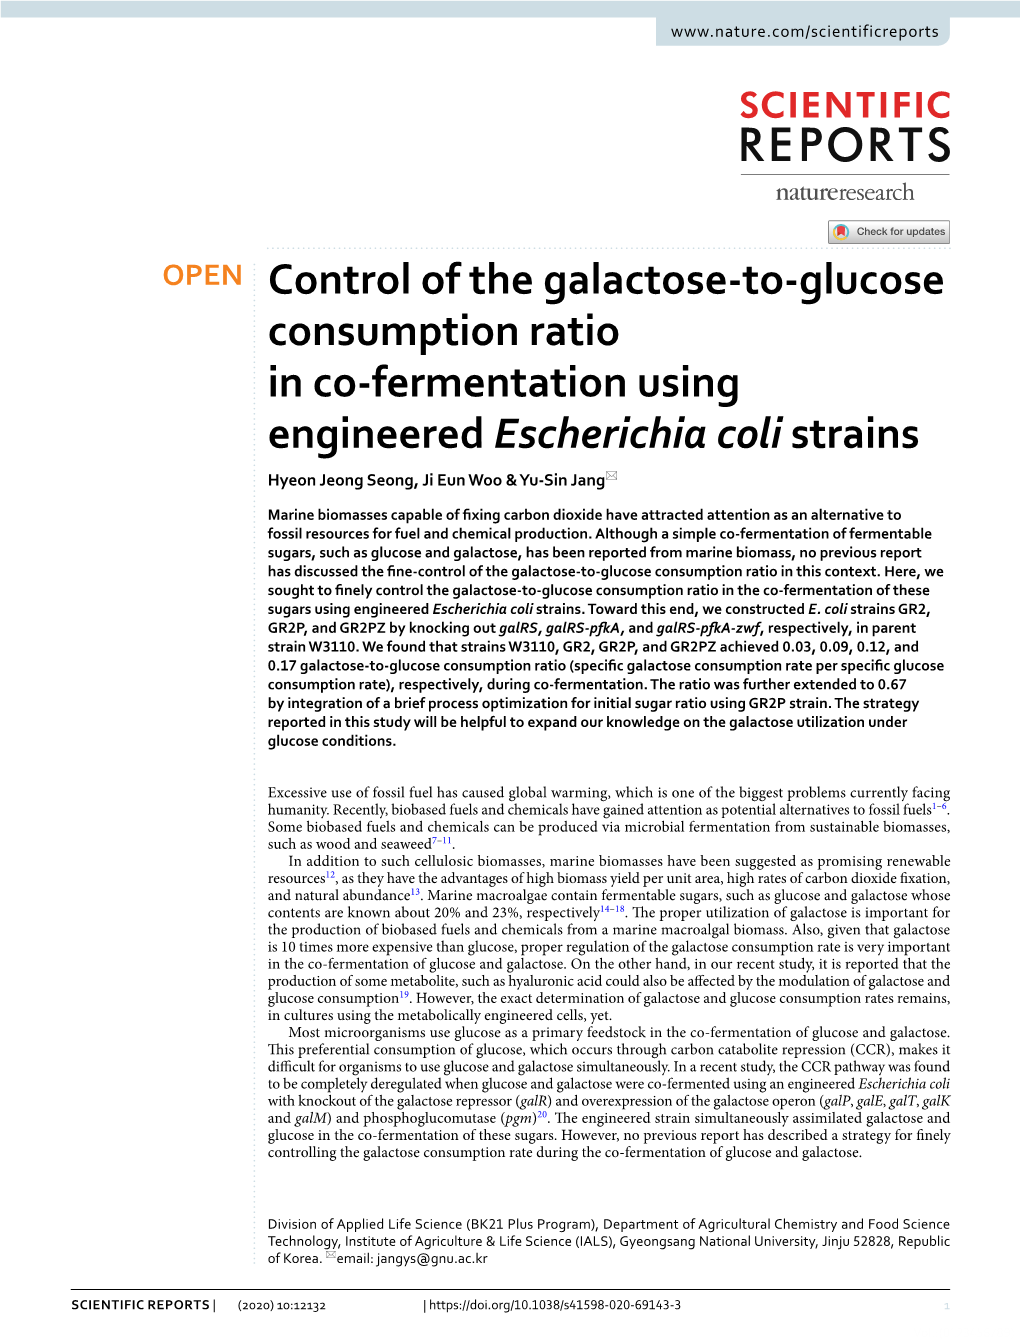 Control of the Galactose-To-Glucose Consumption Ratio in Co